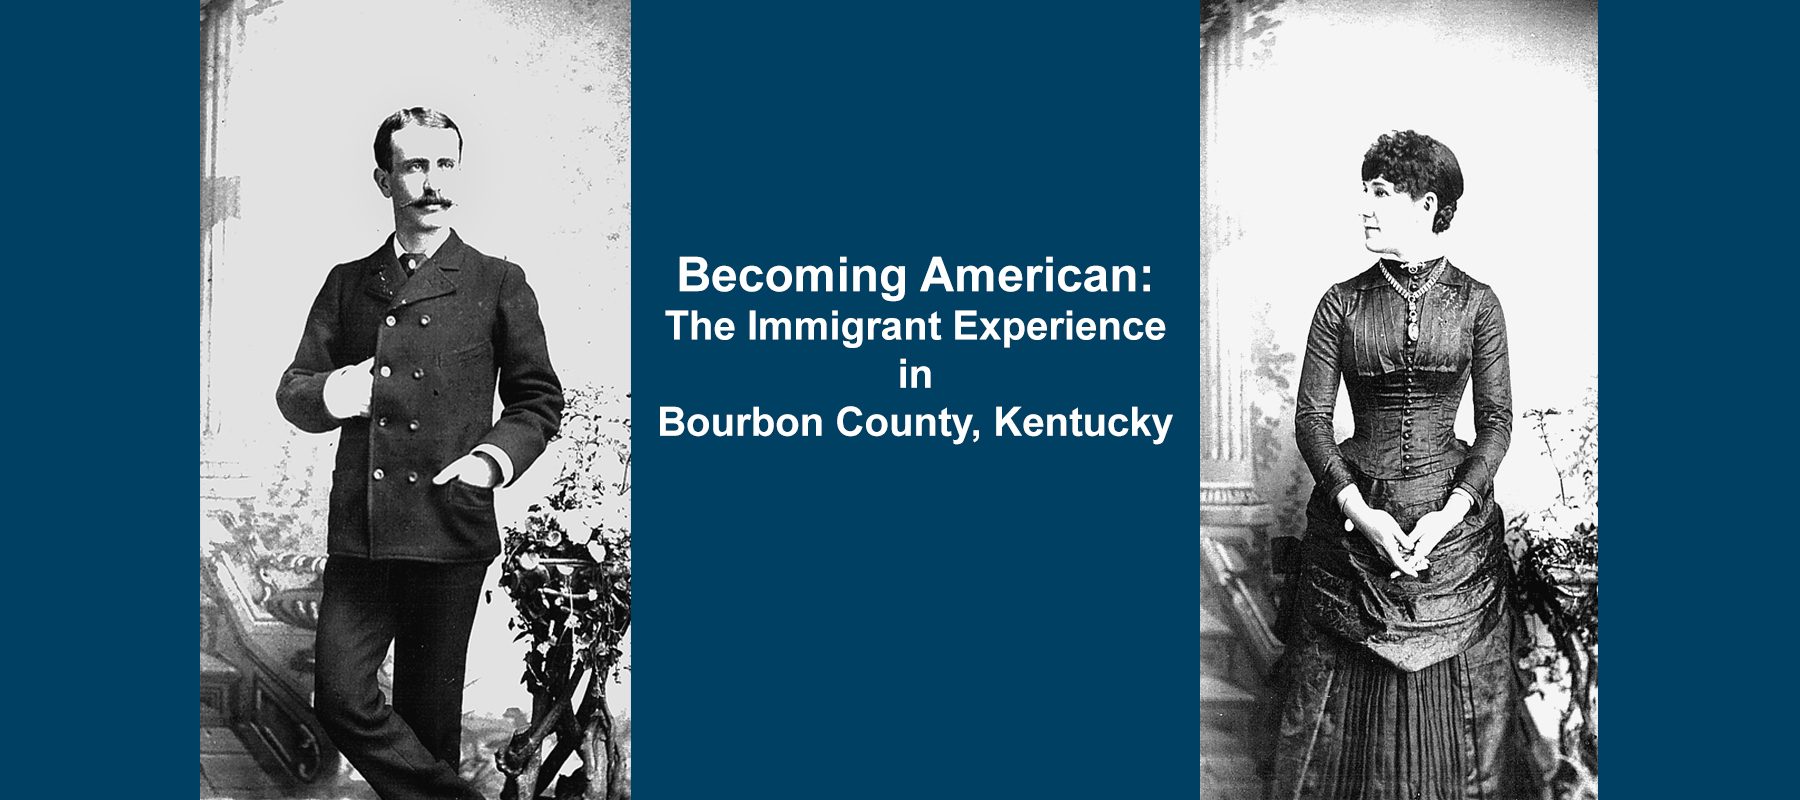 Becoming American: The Immigrant Experience in Bourbon County, Kentucky